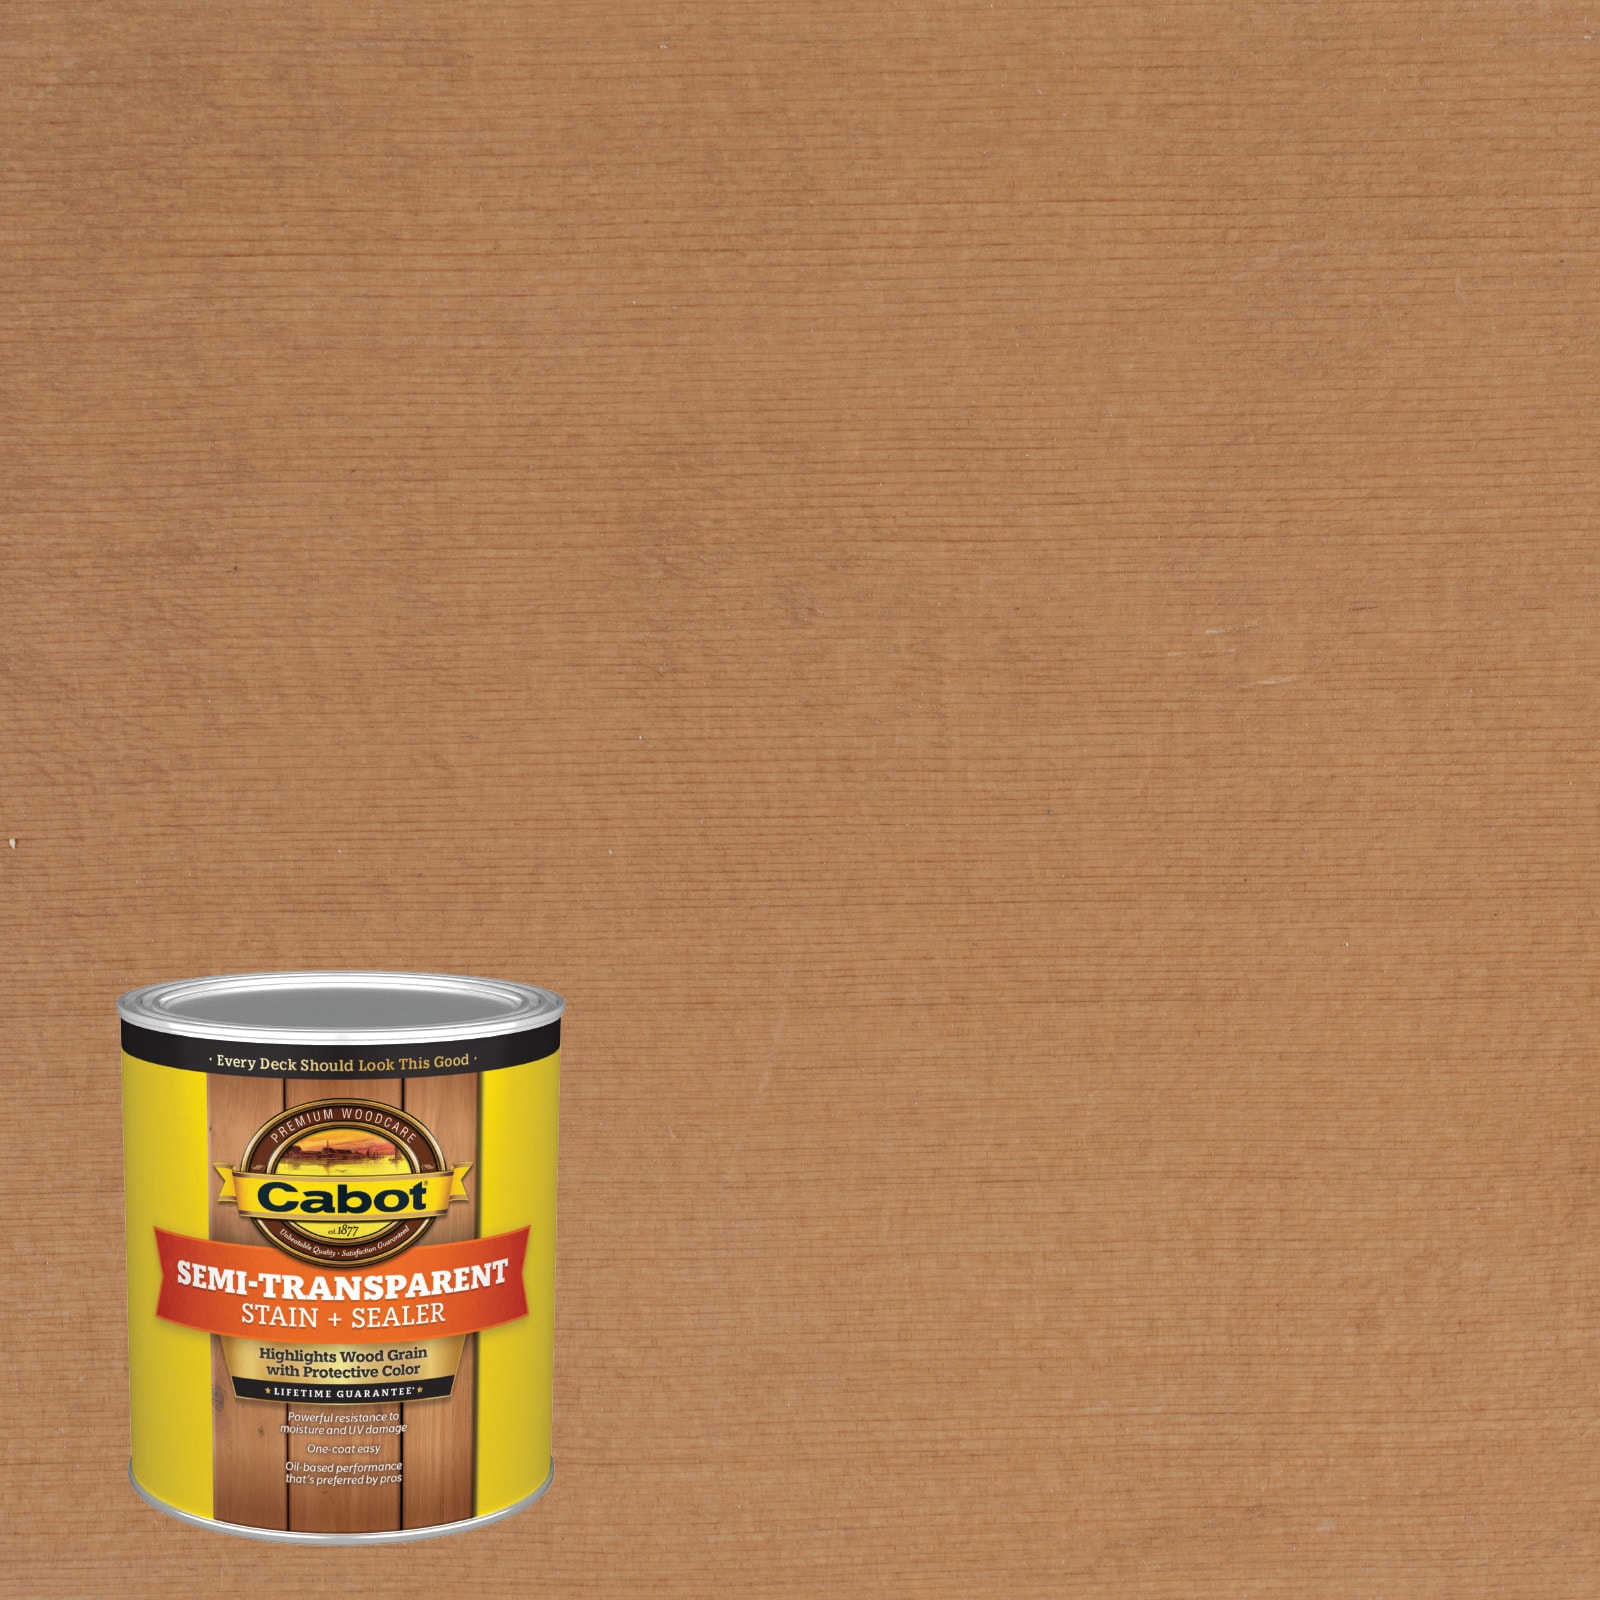 Red Cedar Semi-transparent Exterior Wood Stain and Sealer (1-quart) in Brown | - Cabot RED CEDAR-1028058